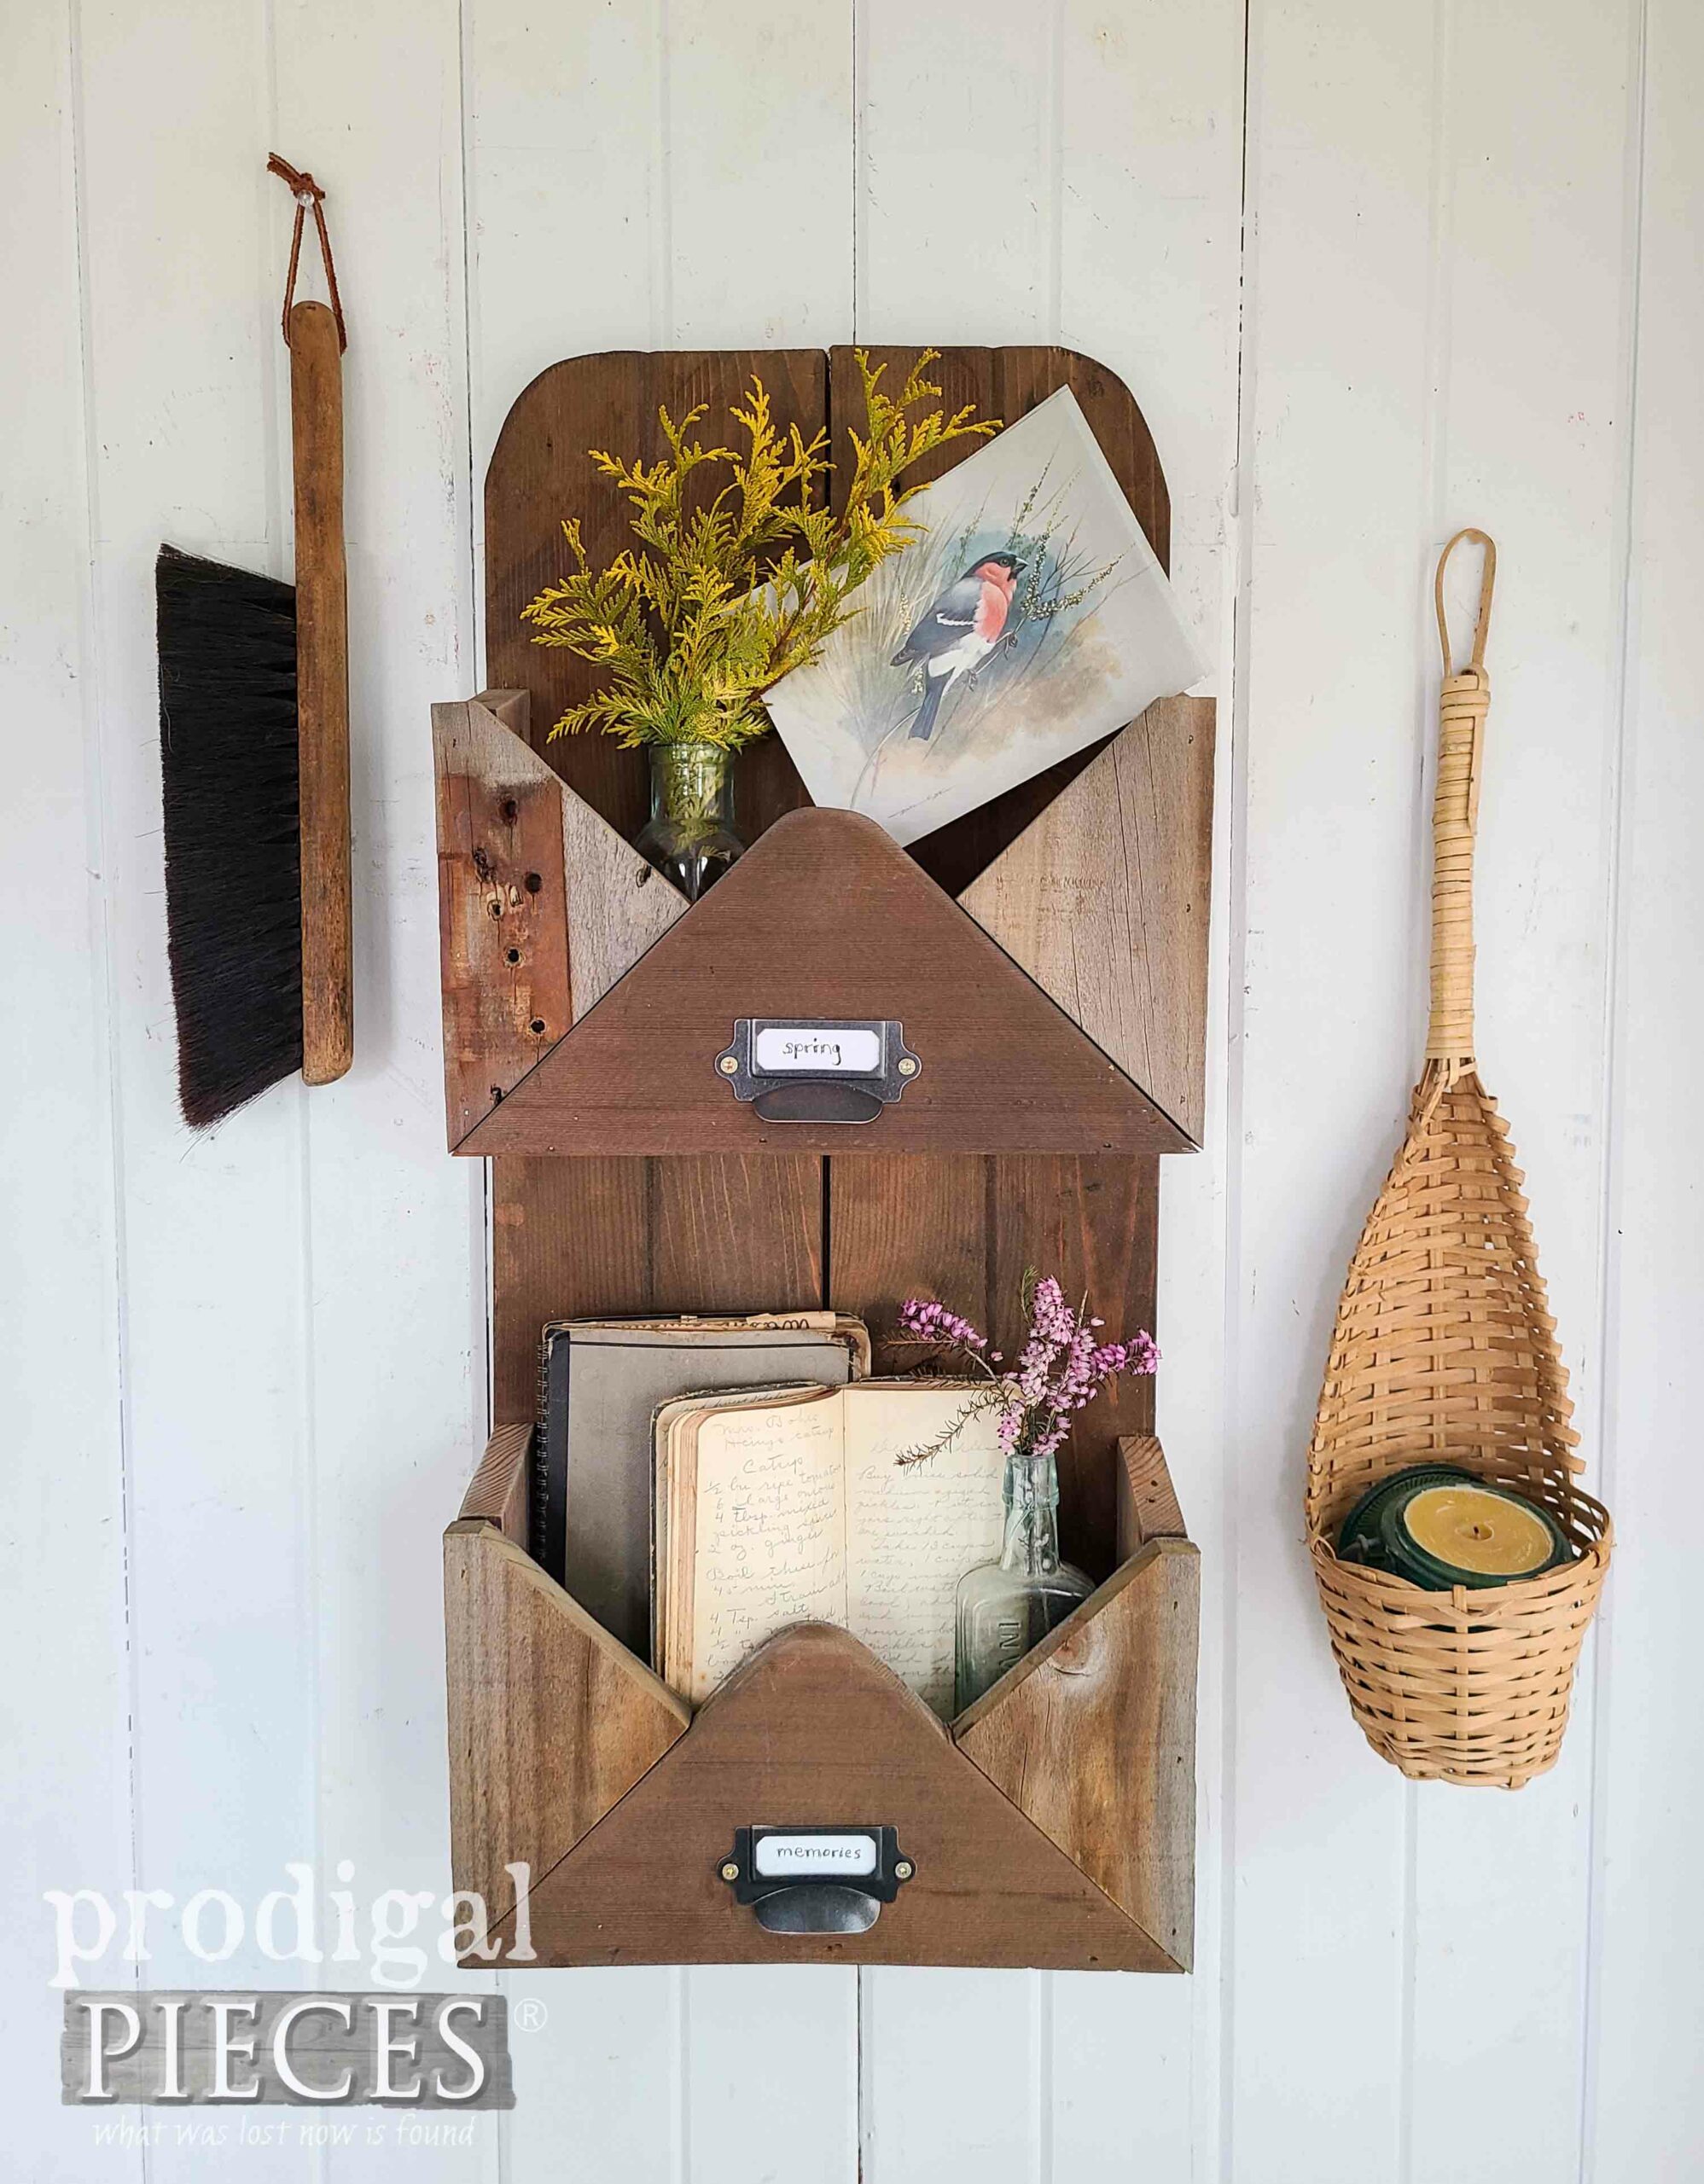 Reclaimed Wall Envelope Pockets with Free Build Plans by Larissa of Prodigal Pieces | prodigalpieces.com #prodigalpieces #diy #buildplans #free #farmhouse #reclaimed